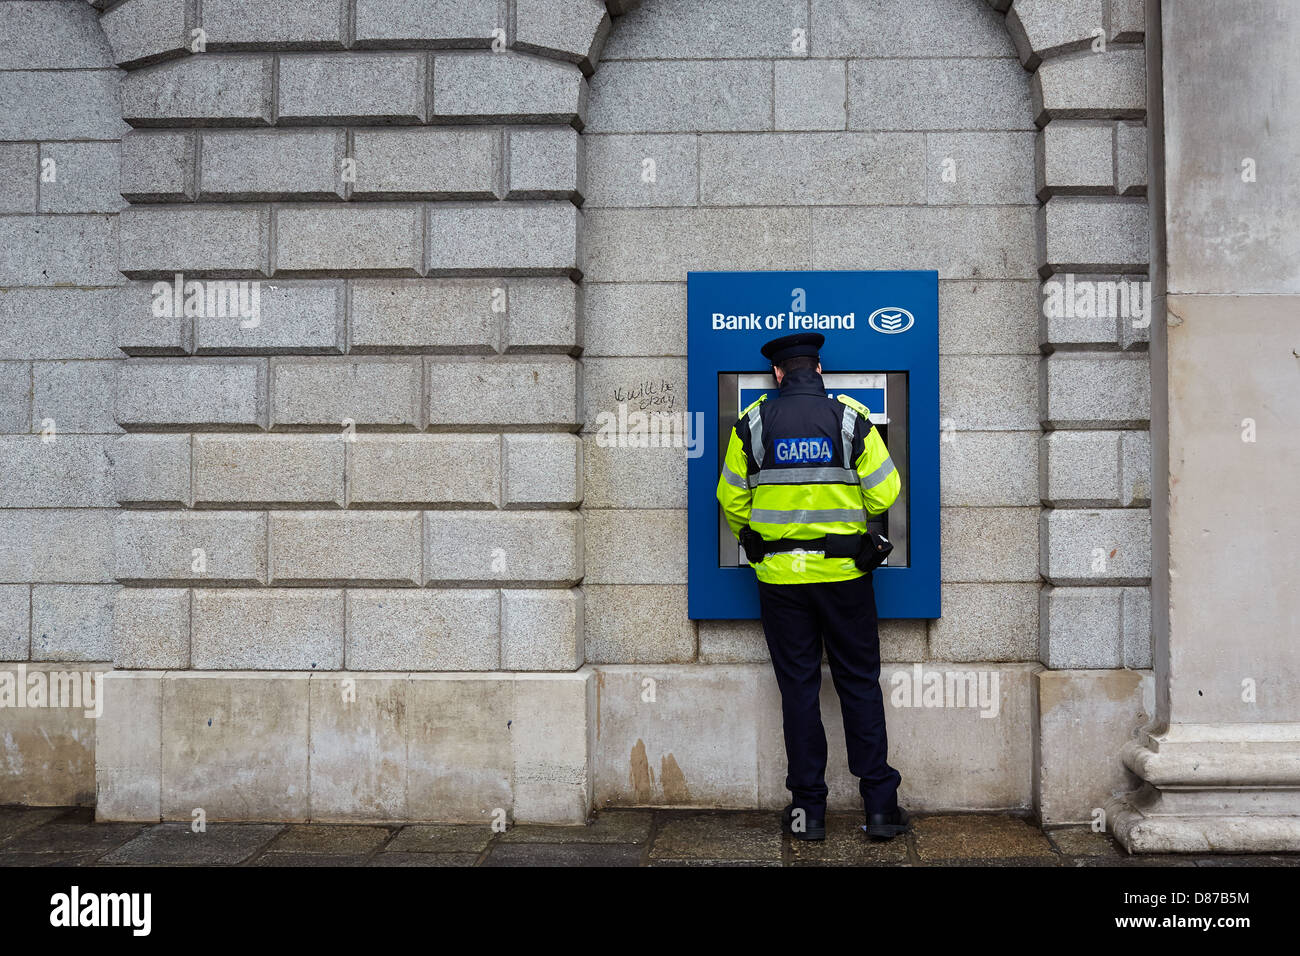 Member of the Garda (Irish police force) using an ATM at the bank of Ireland  during a recession. College Green, Dublin, Ireland Stock Photo